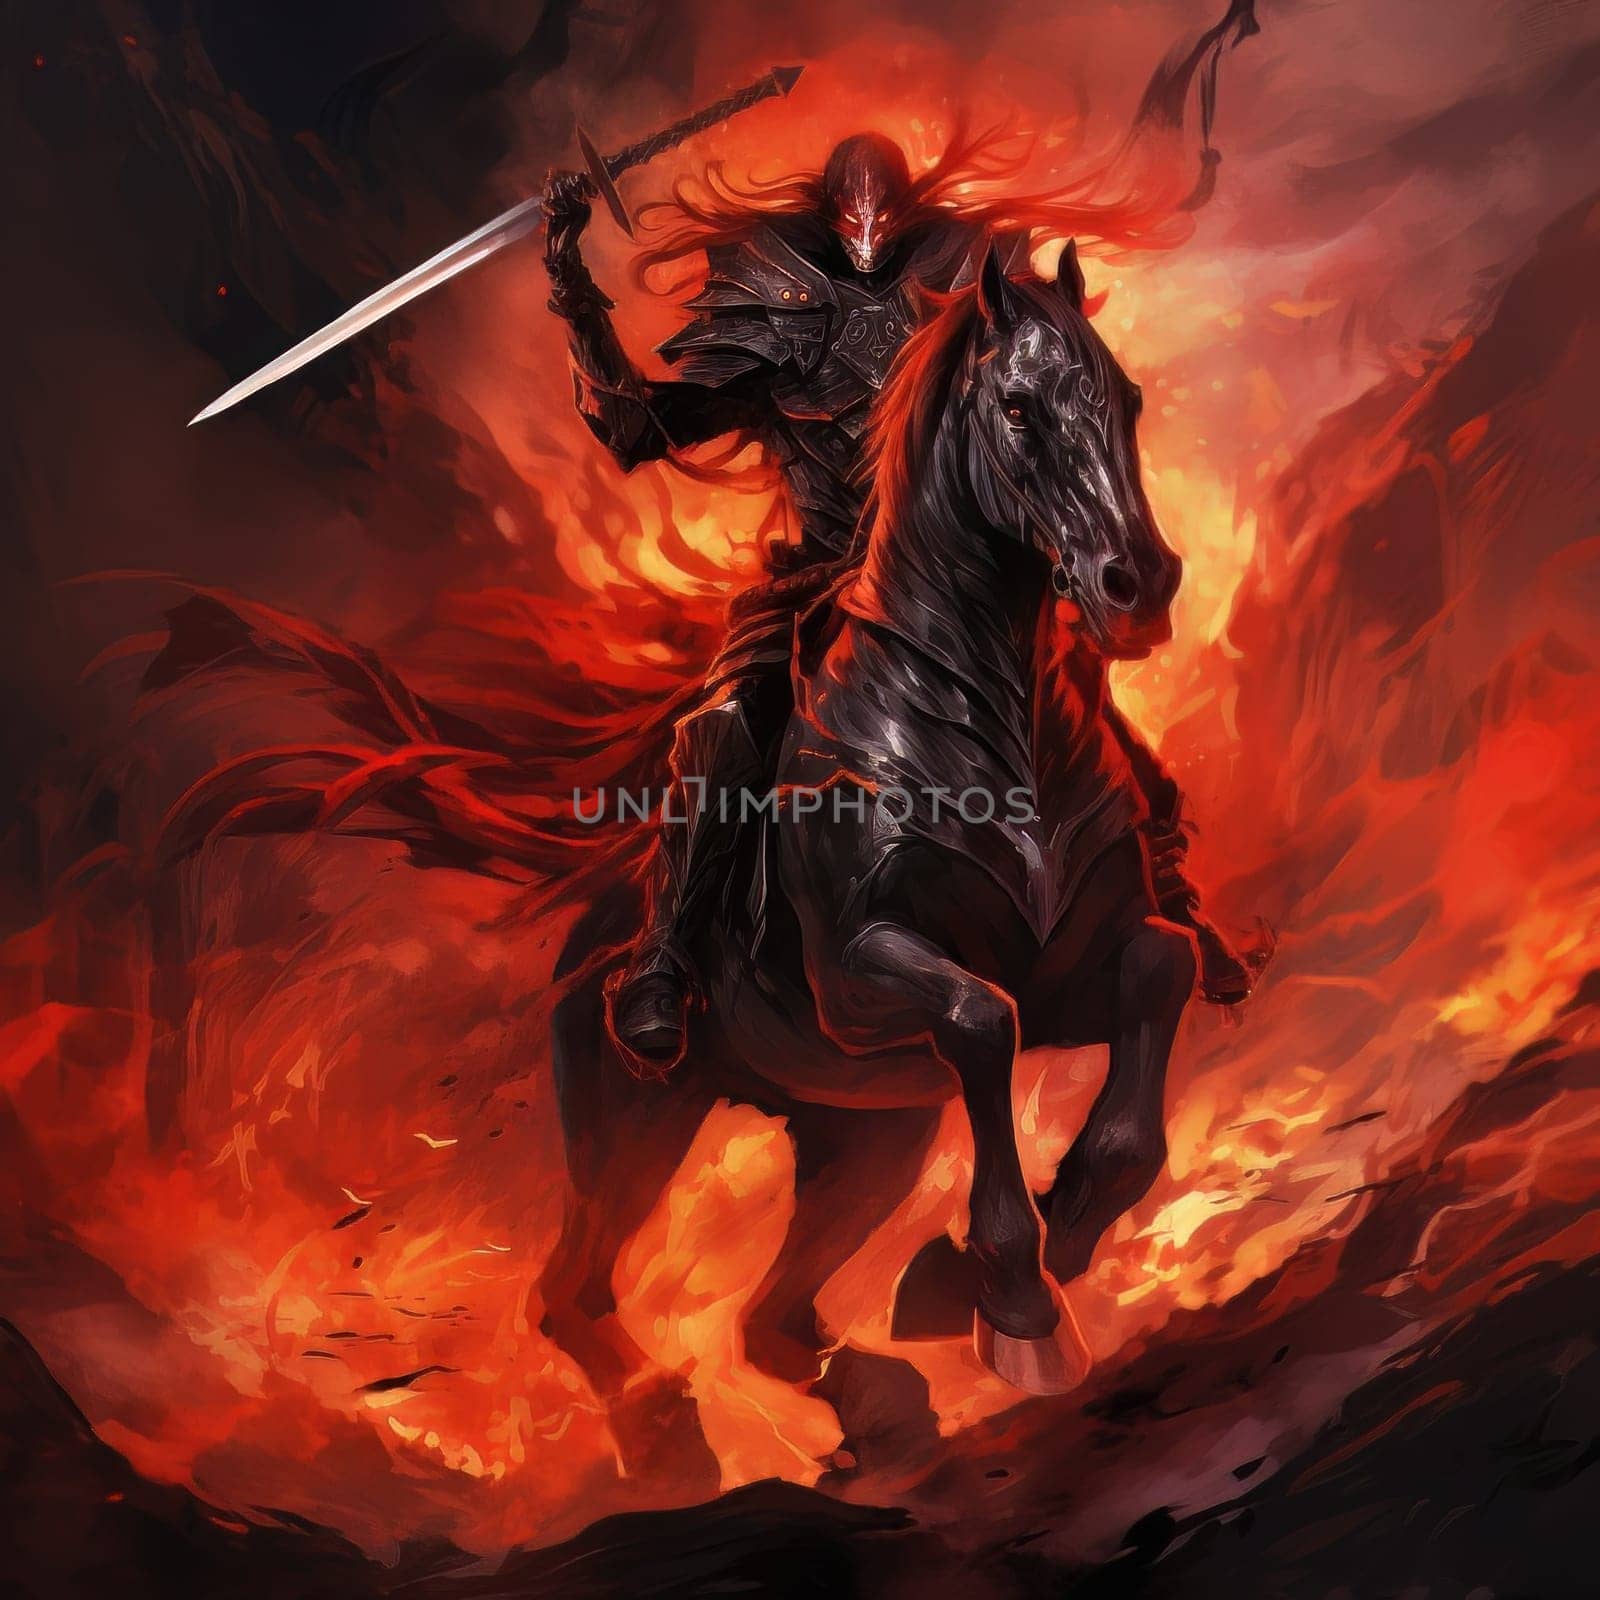 The horseman of the apocalypse riding a black horse against a background of fire, hell and scorched earth. Biblical religious theory of the end of the world. AI